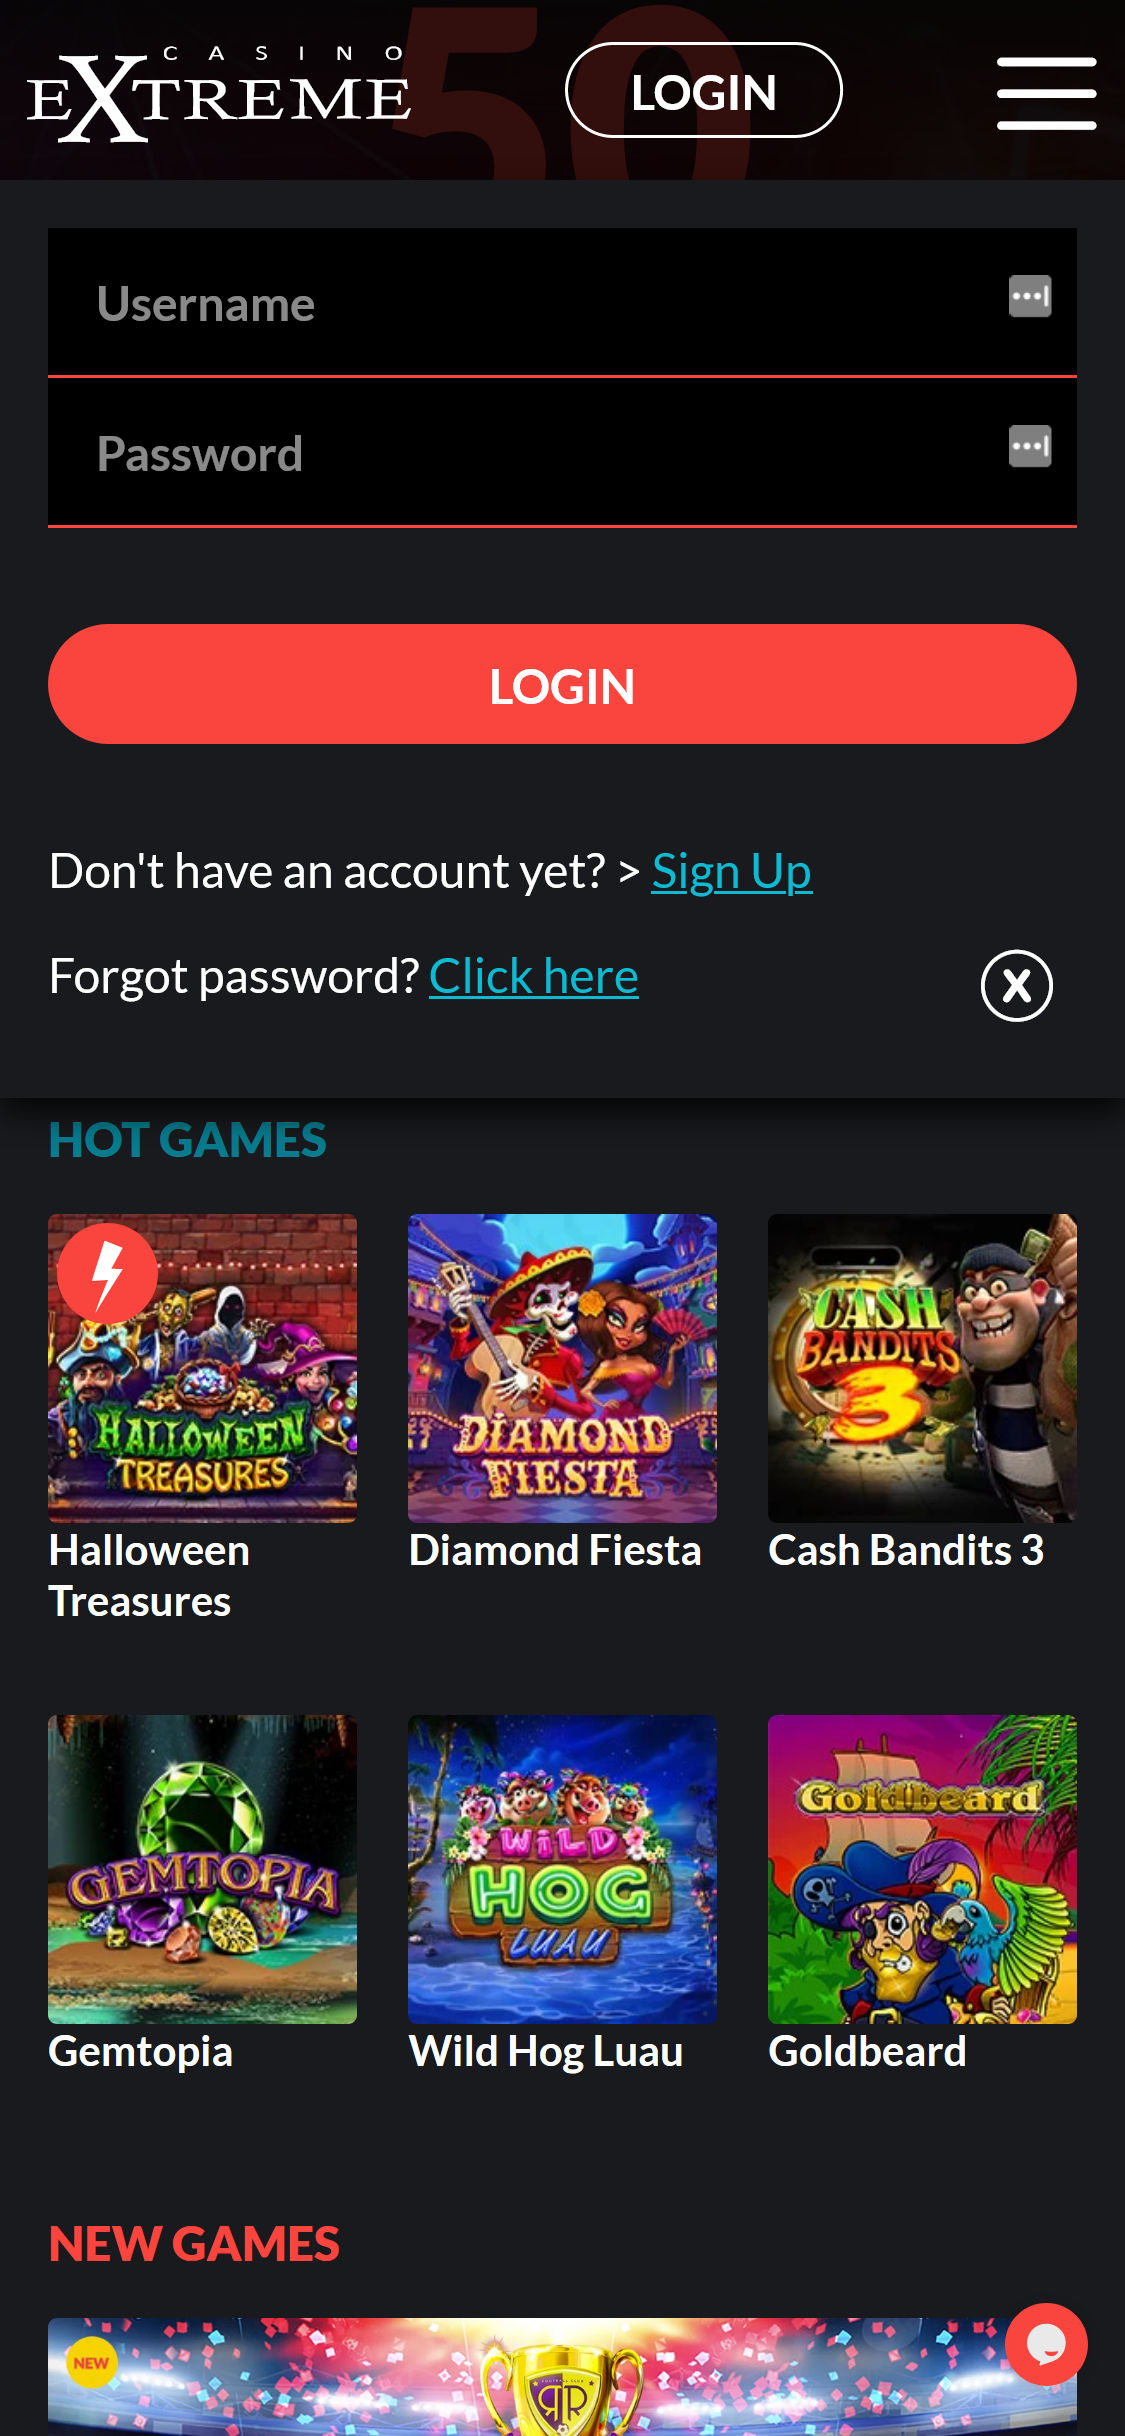 Casino Extreme Mobile Login Review